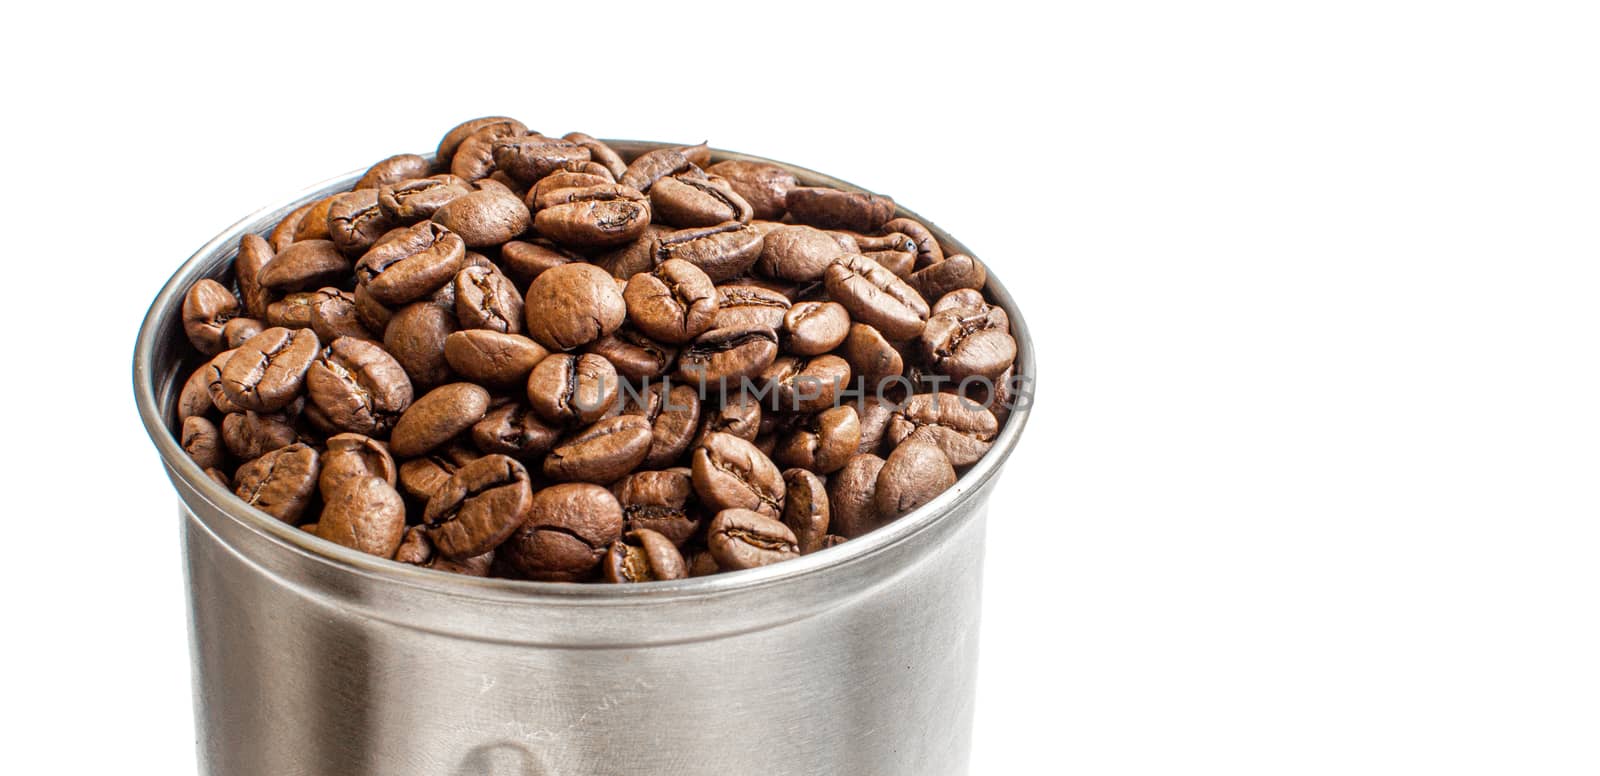 A lot of coffee beans in a metal coffee grinder on a white background by AnatoliiFoto